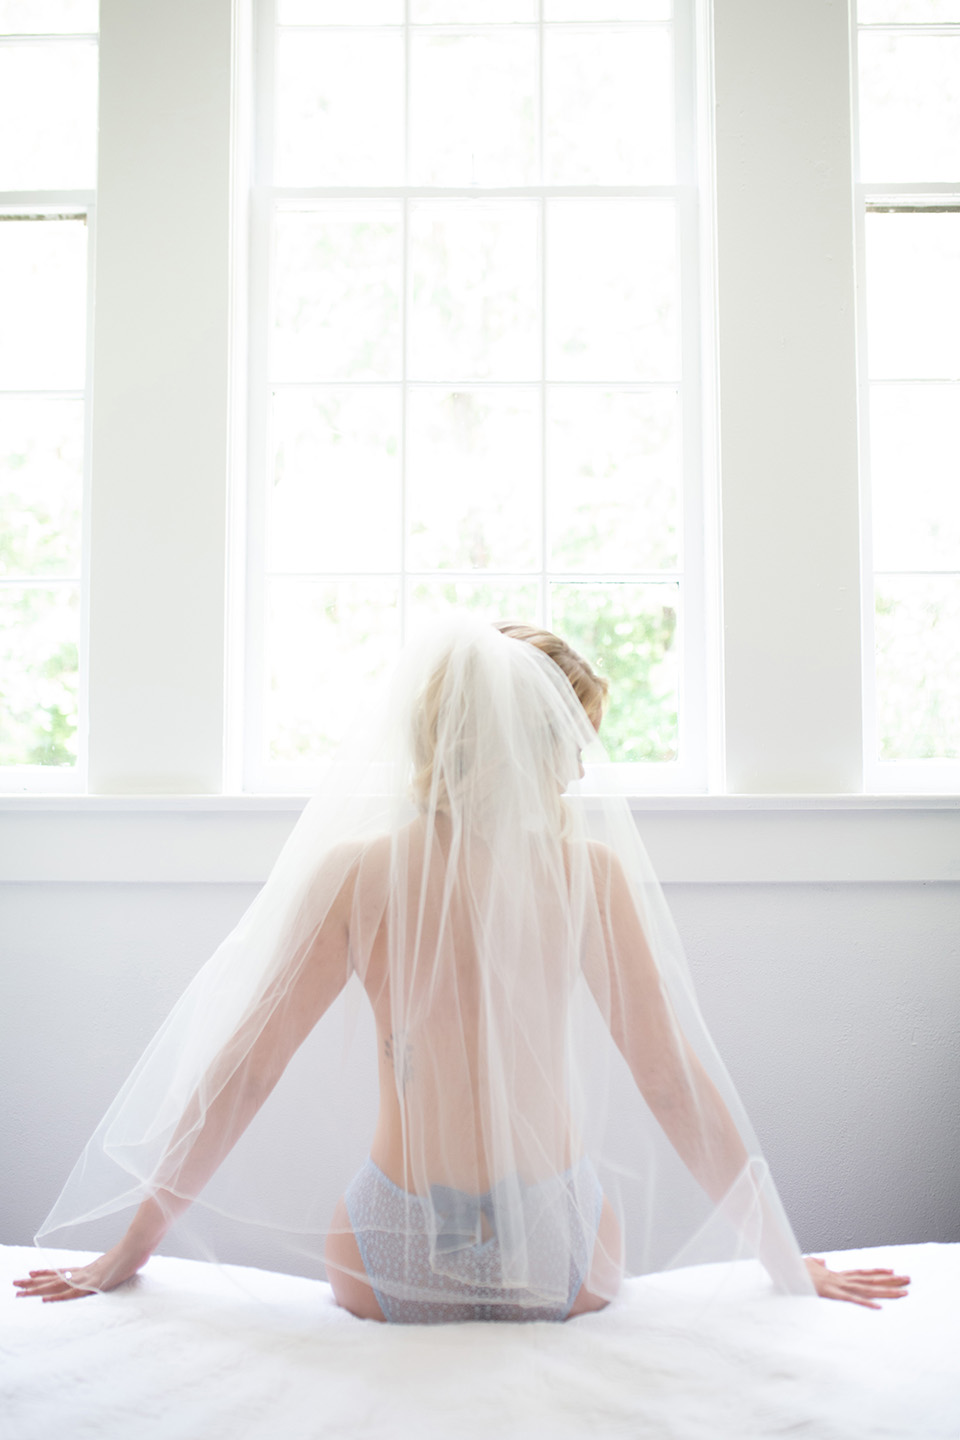 Hush Boudoir Photography in Raleigh, North Carolina specializes in Bridal Boudoir Sessions